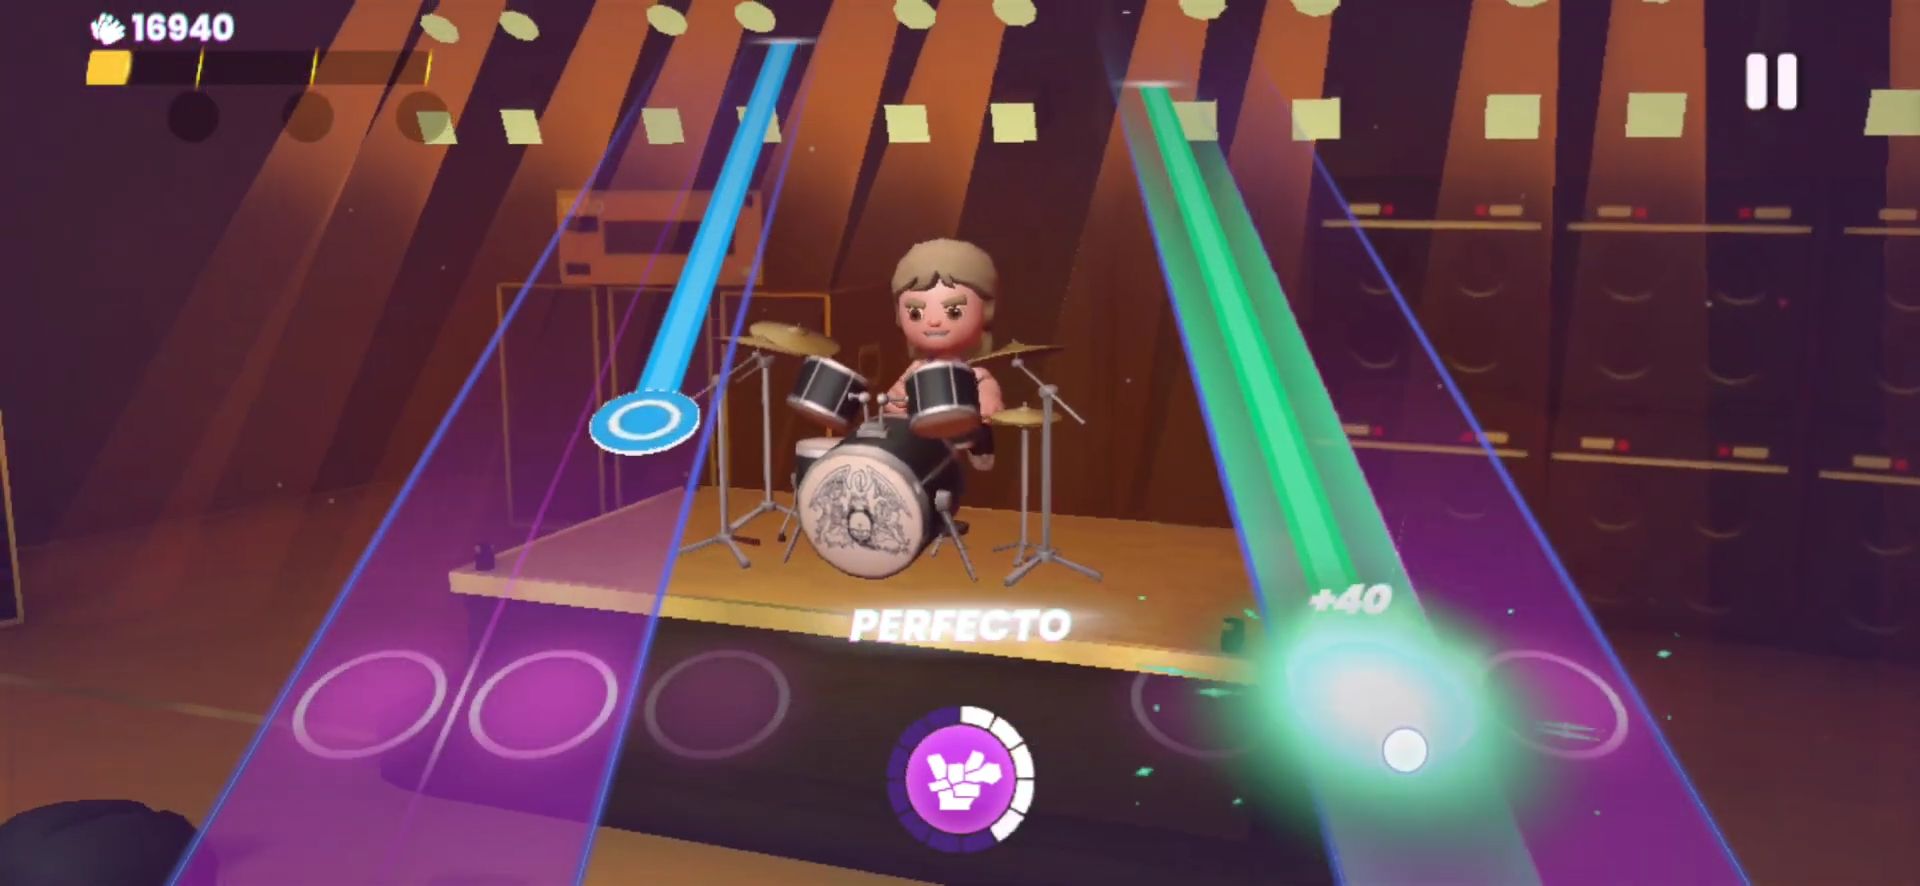 Queen: Rock Tour - The Official Rhythm Game for Android